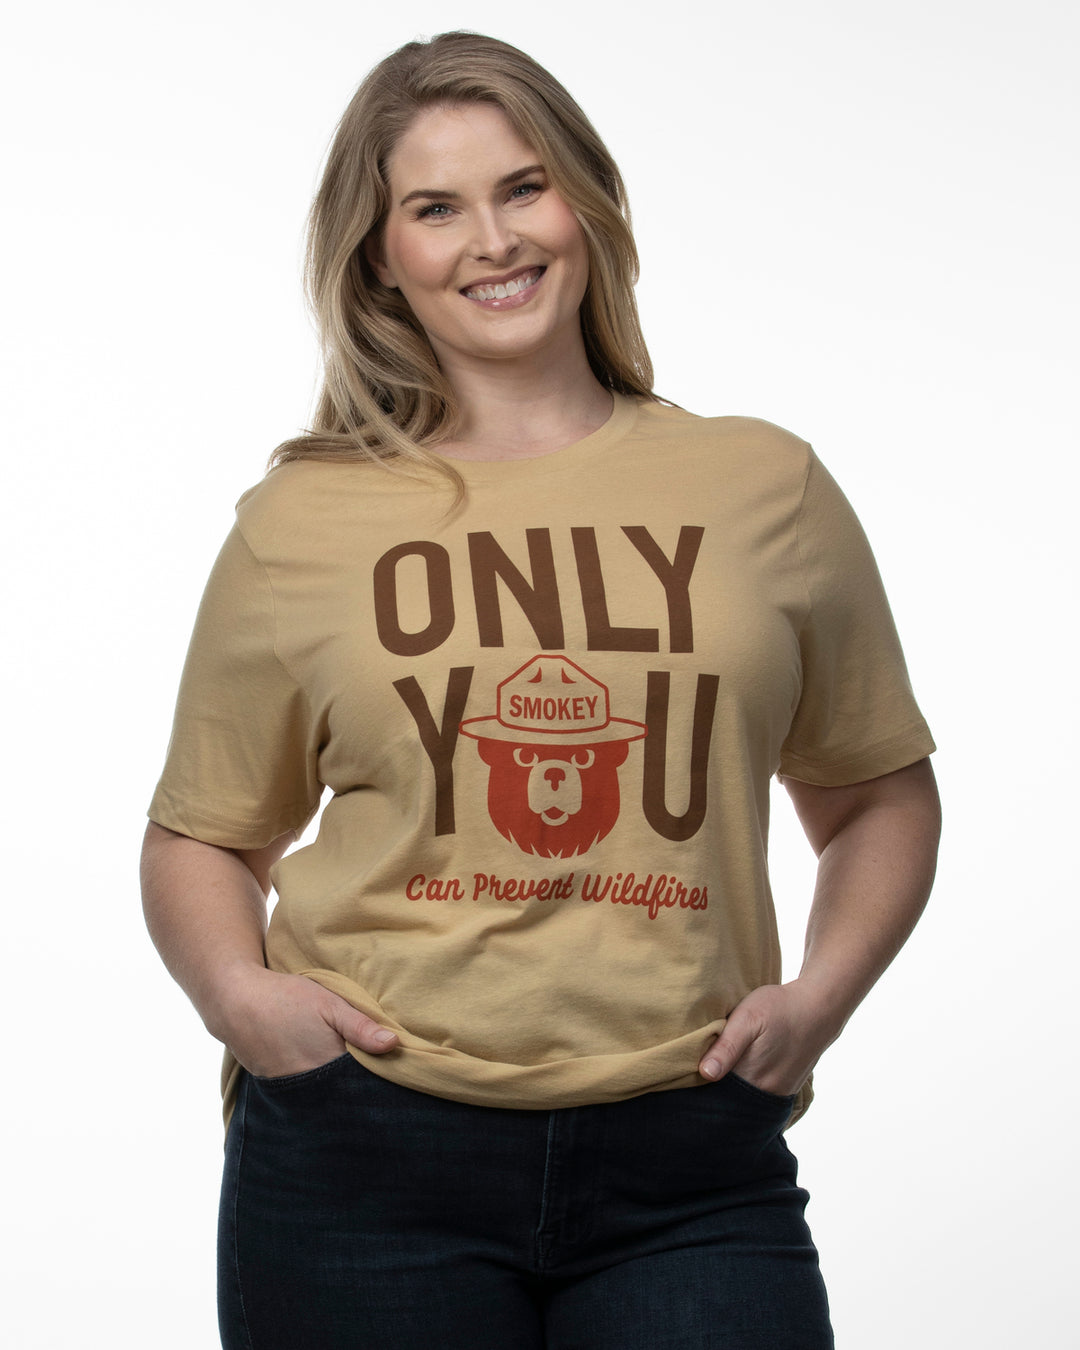 Only You Heritage Unisex Short Sleeve Tee Shirts & Tops  